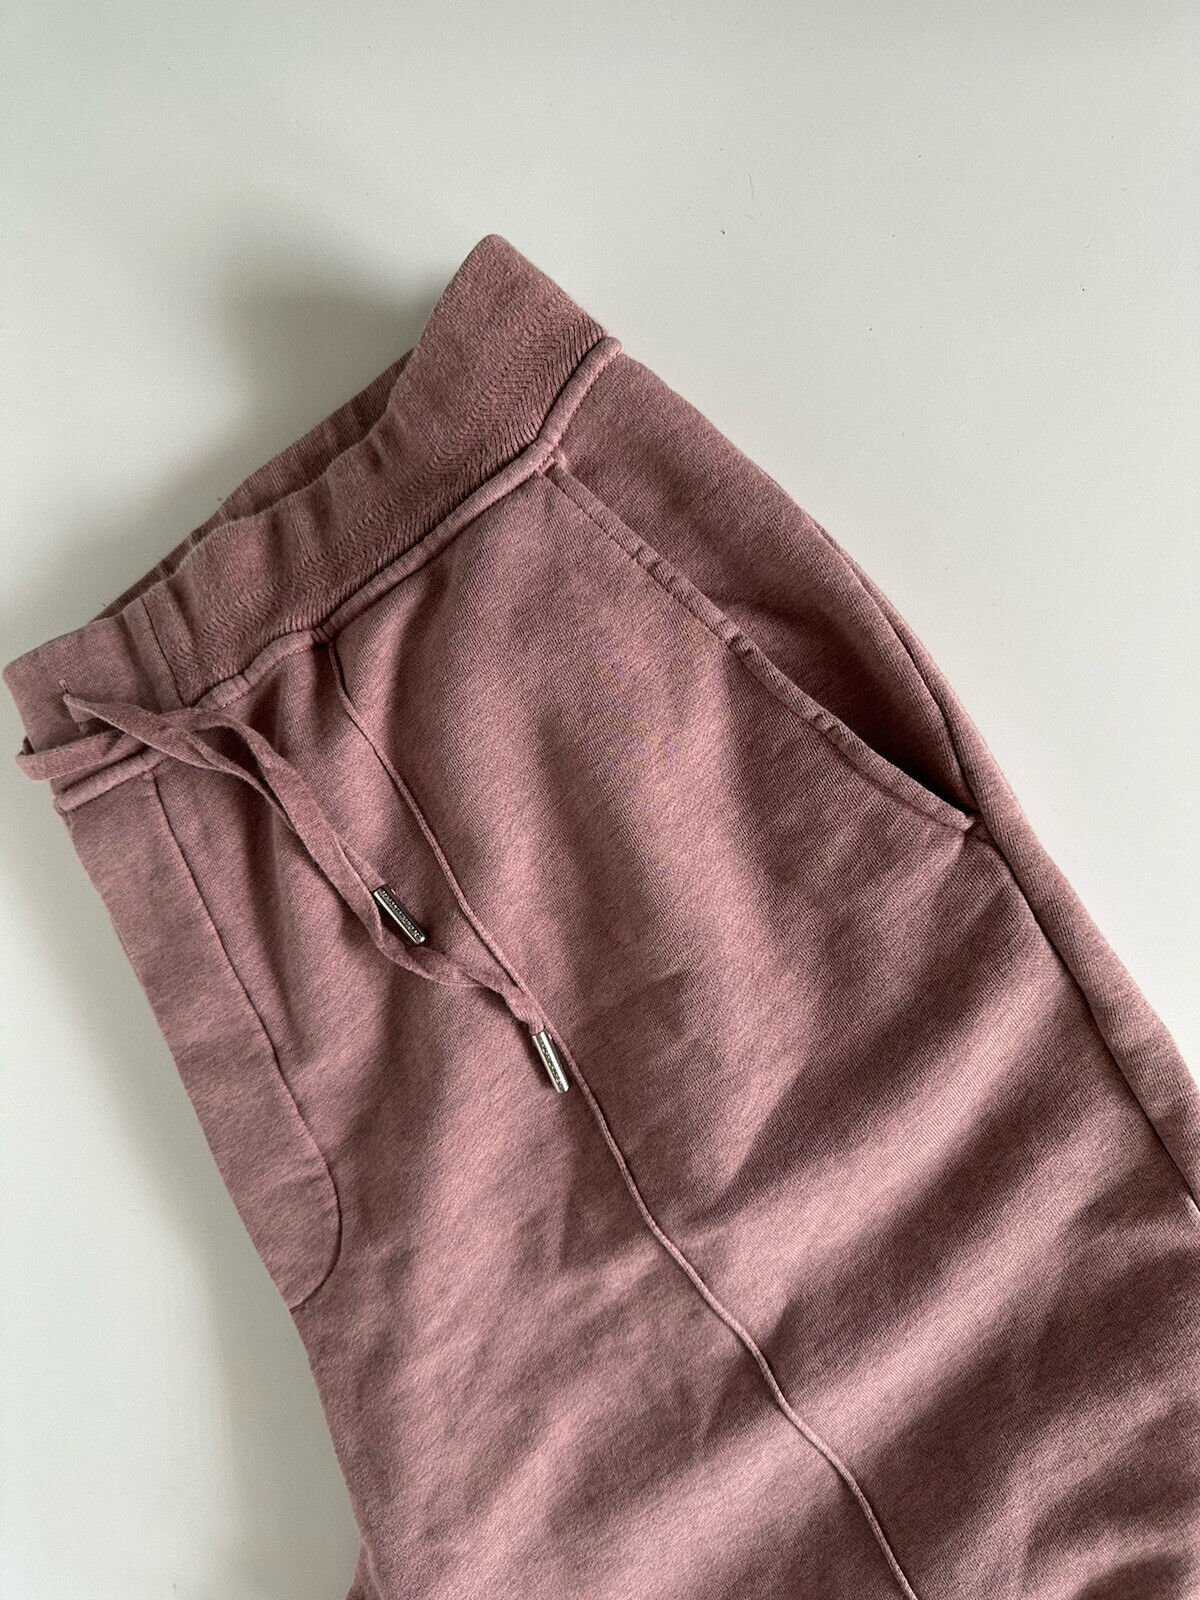 NWT $450 Ralph Lauren Purple Label Casual Pink Pants 2XL Made in Italy